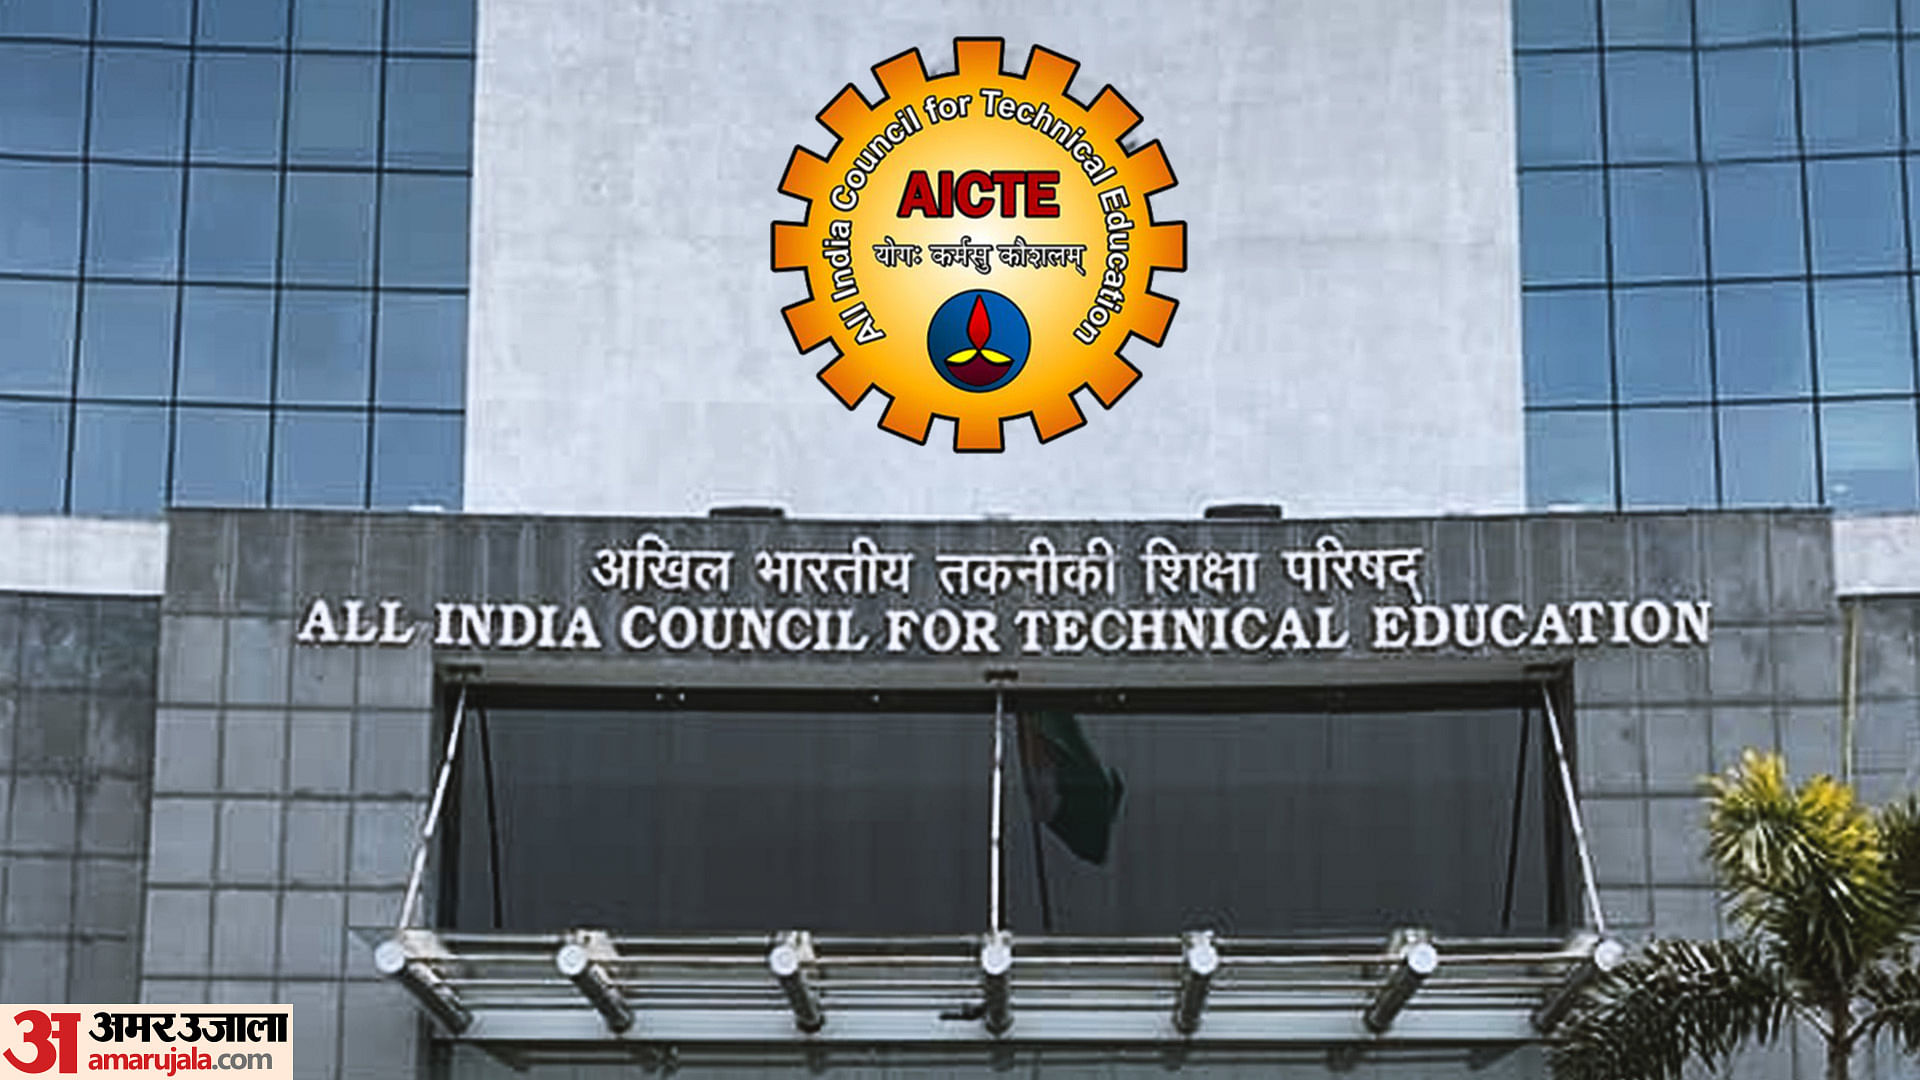 AICTE's New Initiative: Employment Training for Technical College Students